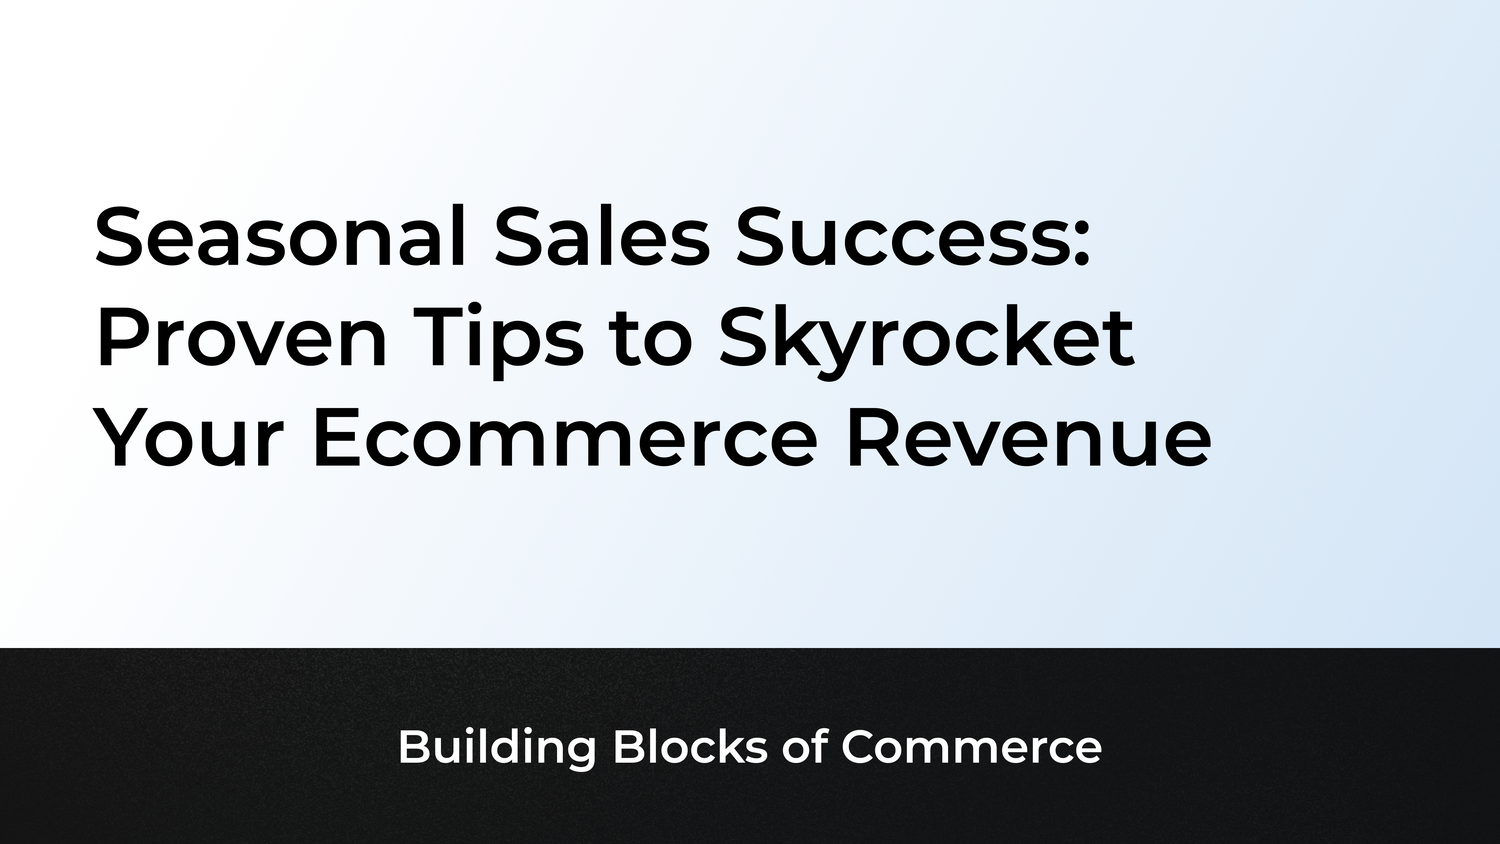 Seasonal Sales Success: Proven Tips to Skyrocket Your Ecommerce Revenue